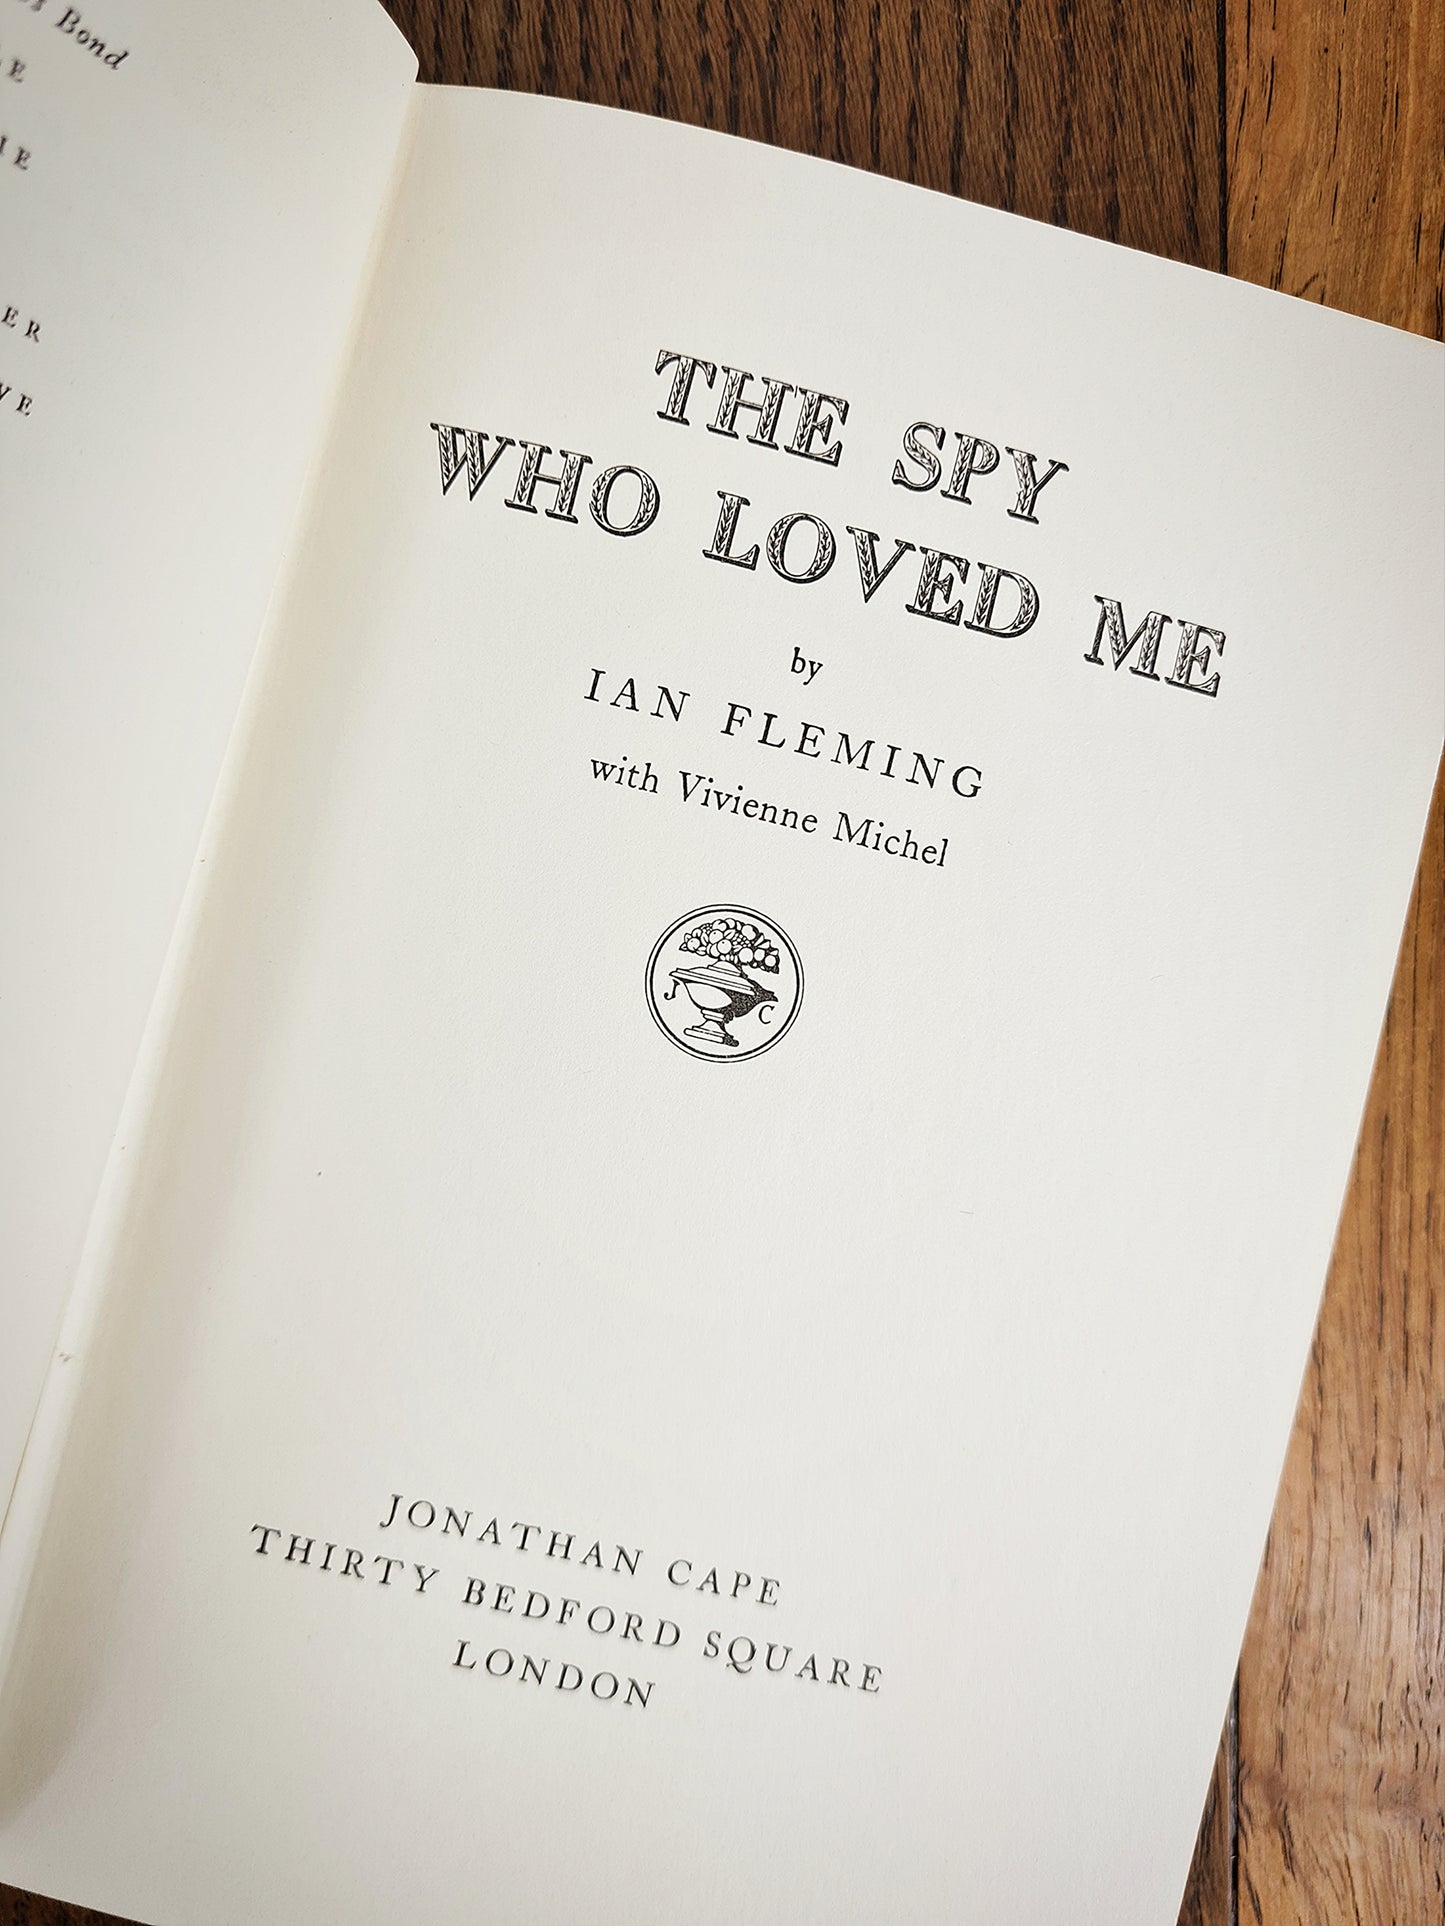 First edition James Bond, The Spy Who Loved Me, Ian Fleming. First edition, first printing.